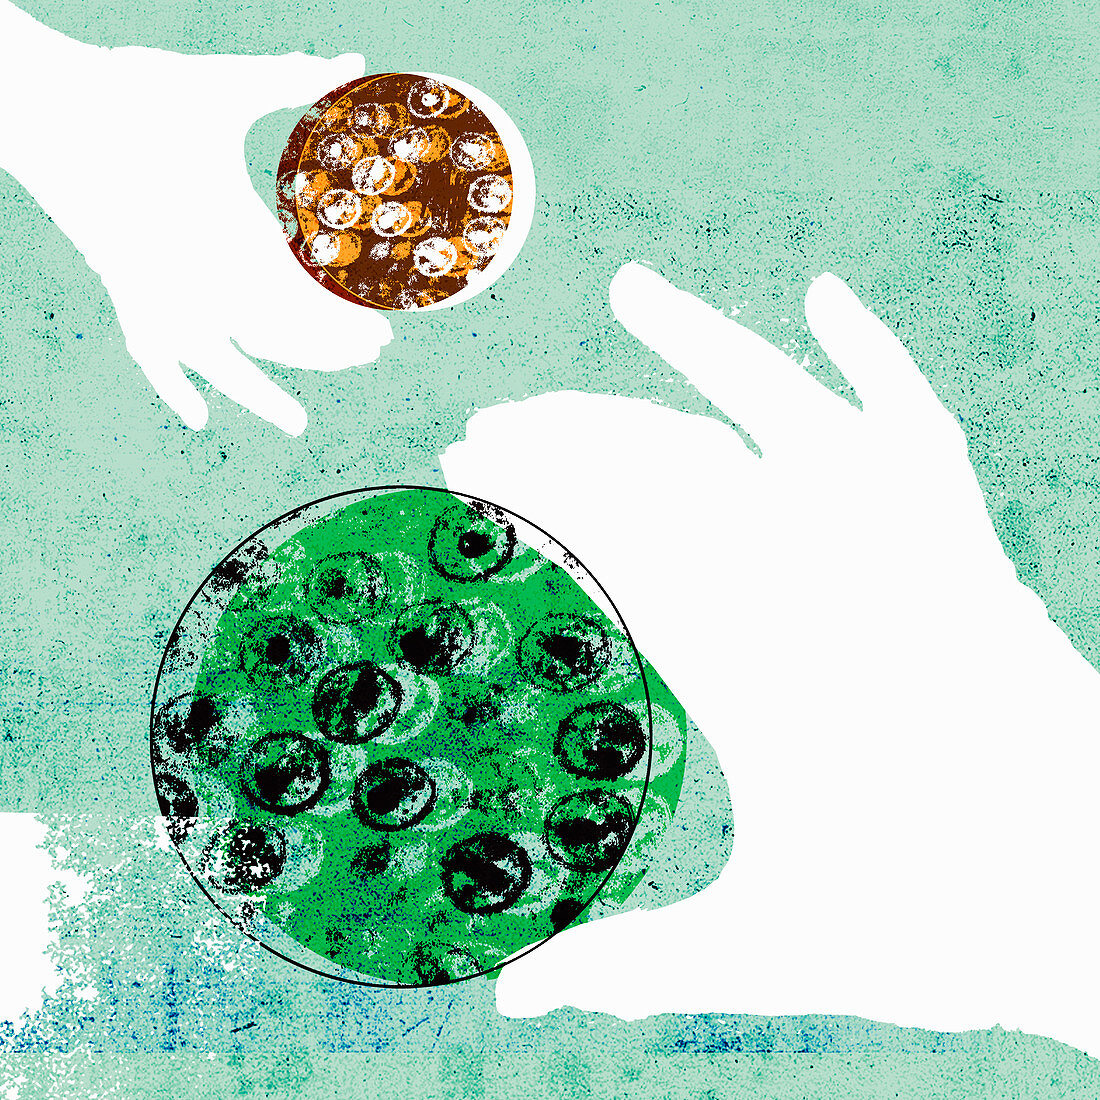 Close up of hands holding petri dishes, illustration